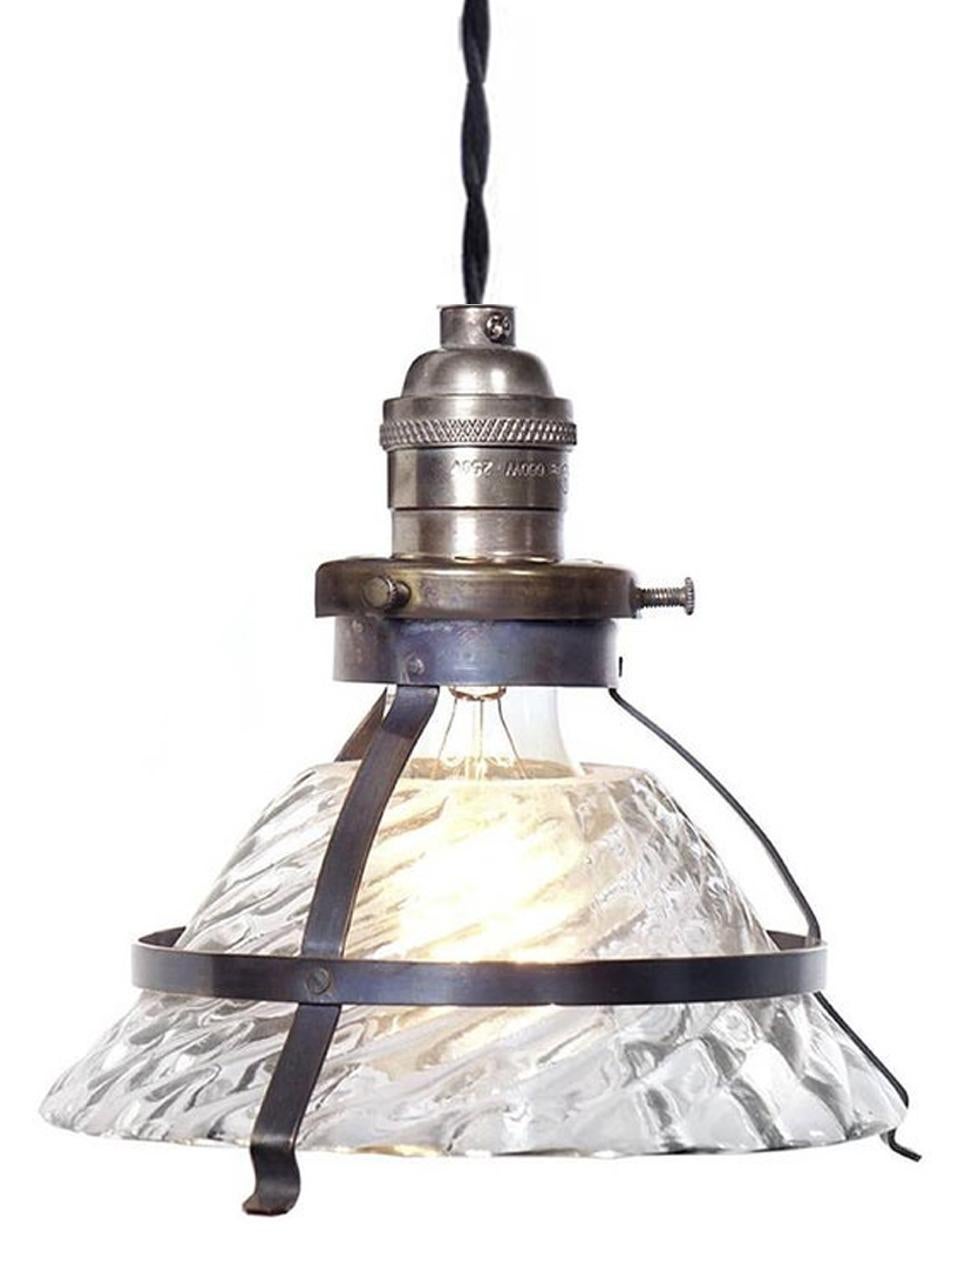 This is a unique industrial snap-in shade fixture. This shade was in the style of an early X-Ray lamp reflector. They have an elegant and complex industrial look with a 6.6 inch diameter and standard size brass socket. The combination of a clear